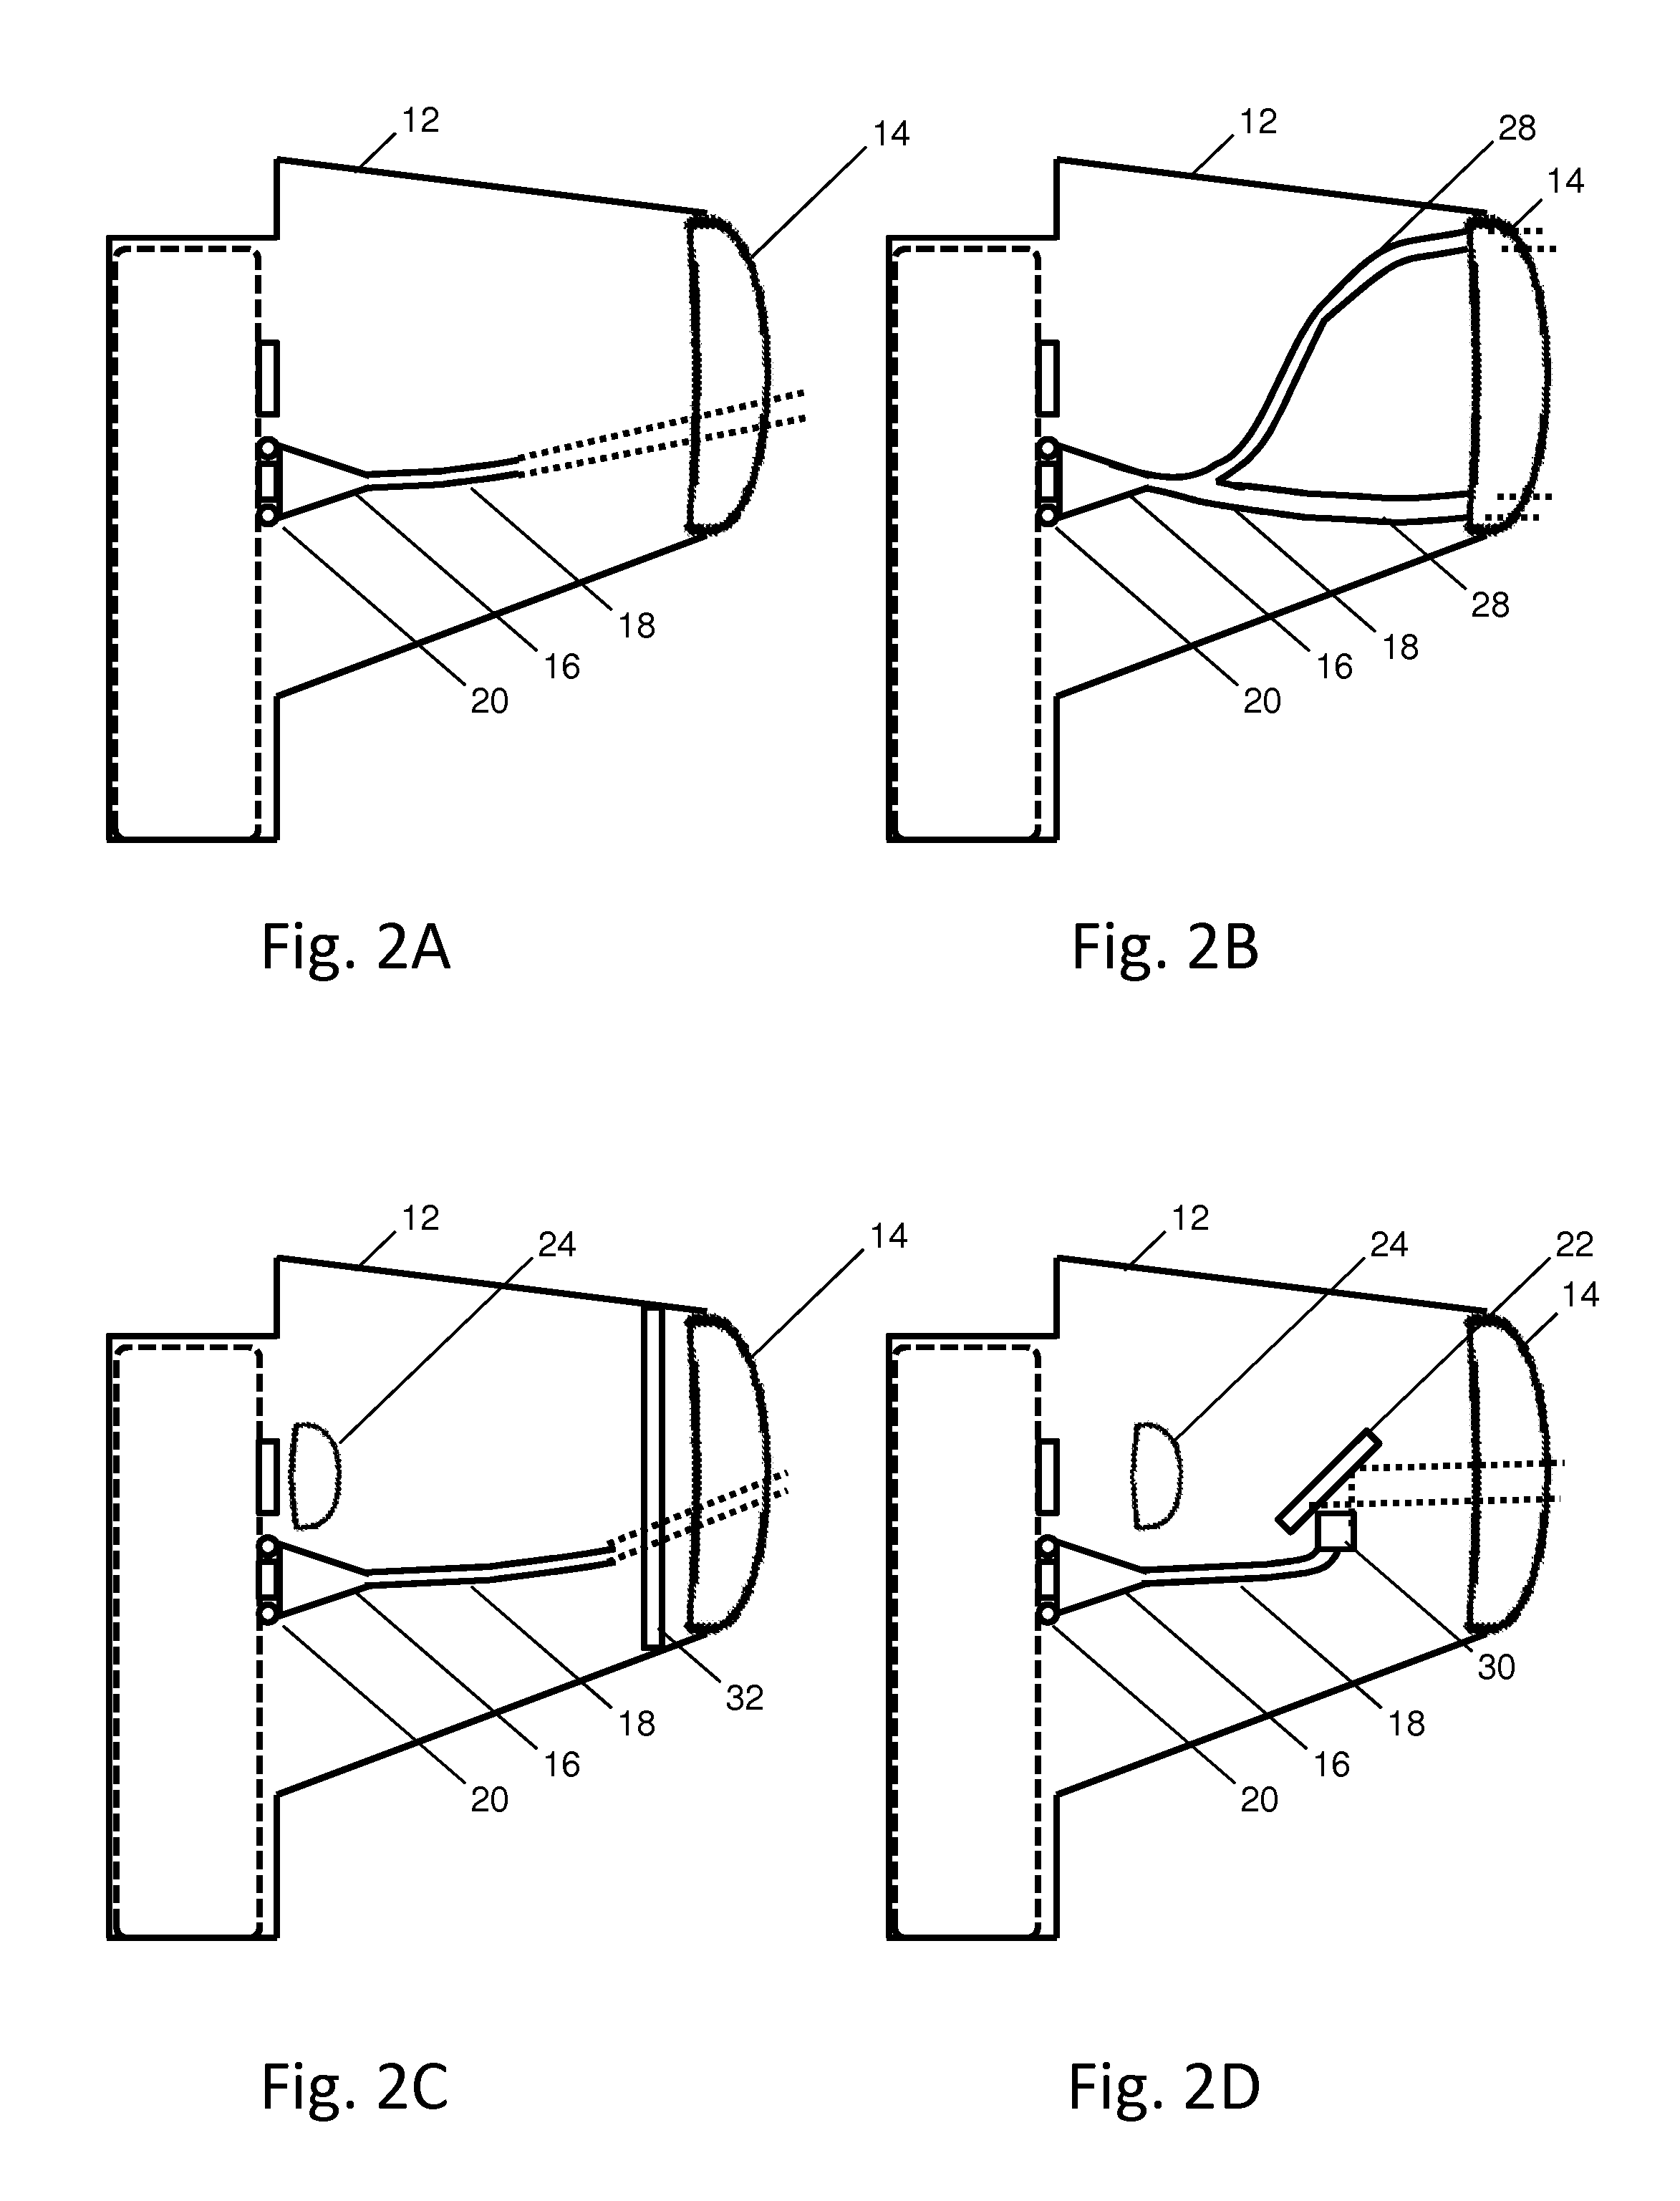 Optical adapter for ophthalmological imaging apparatus